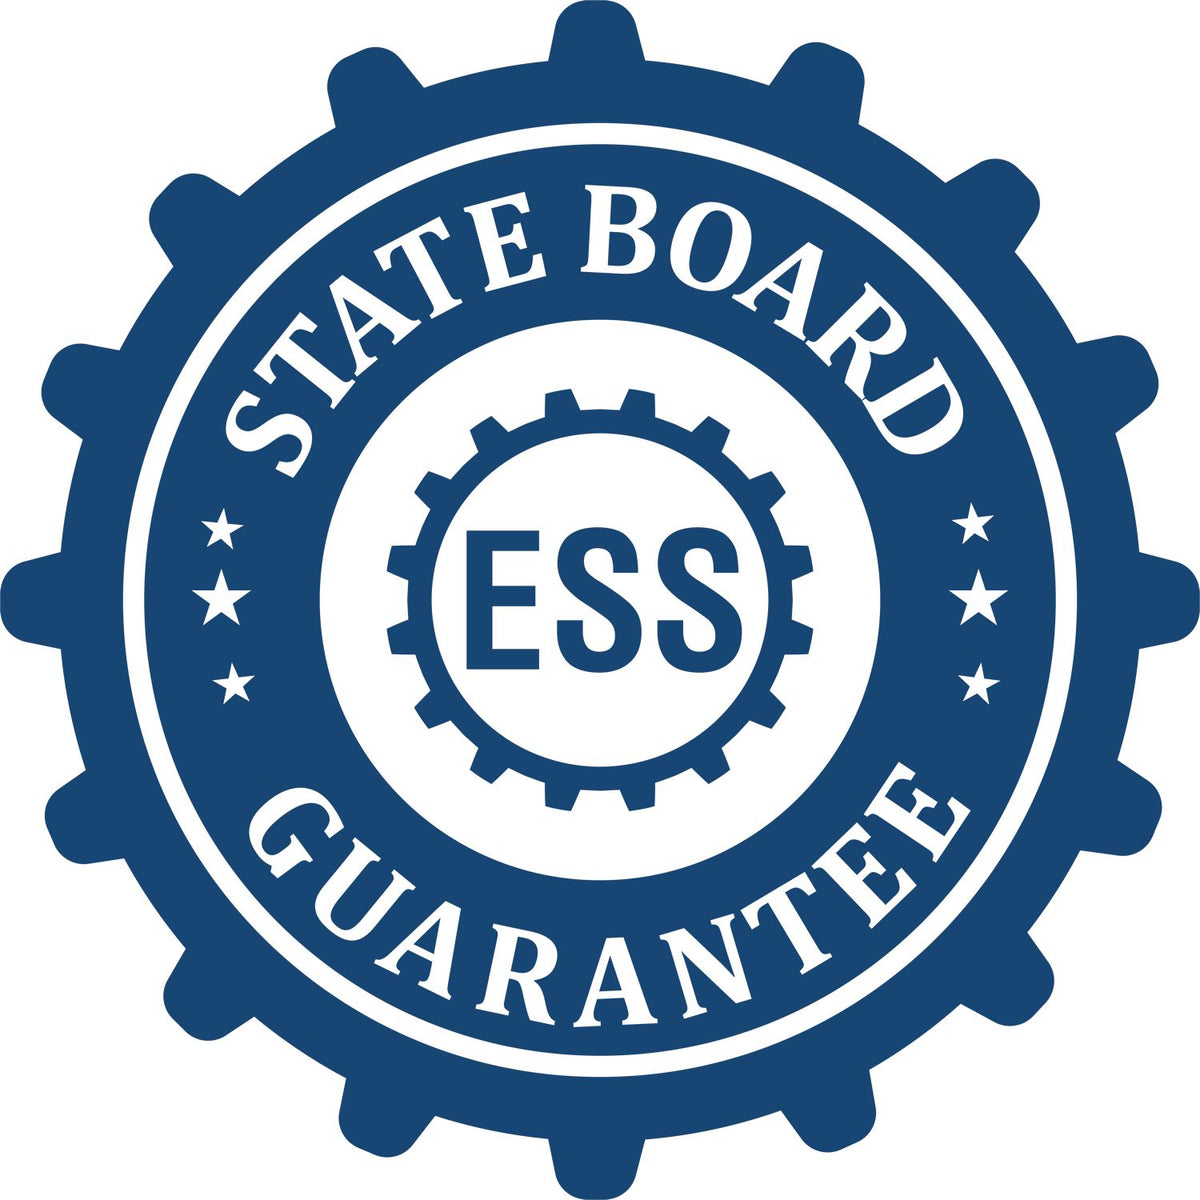 An emblem in a gear shape illustrating a state board guarantee for the Handheld Colorado Professional Geologist Embosser